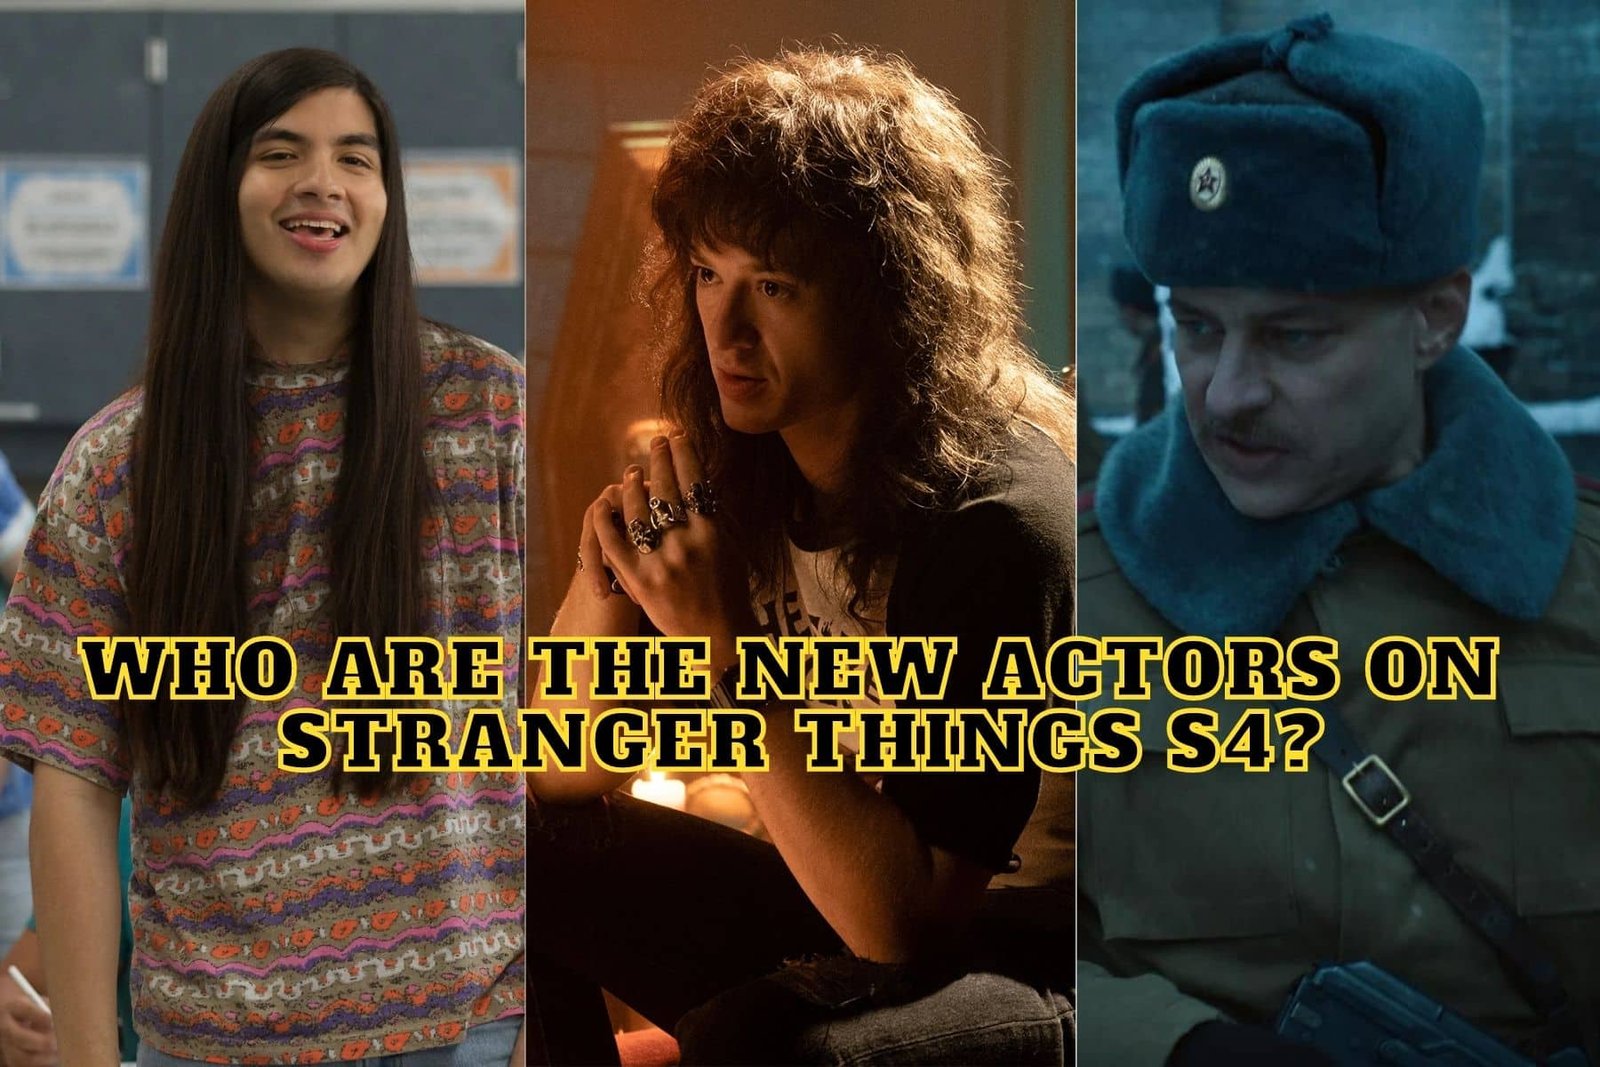 Who Are the New Actors on Stranger Things Season 4?